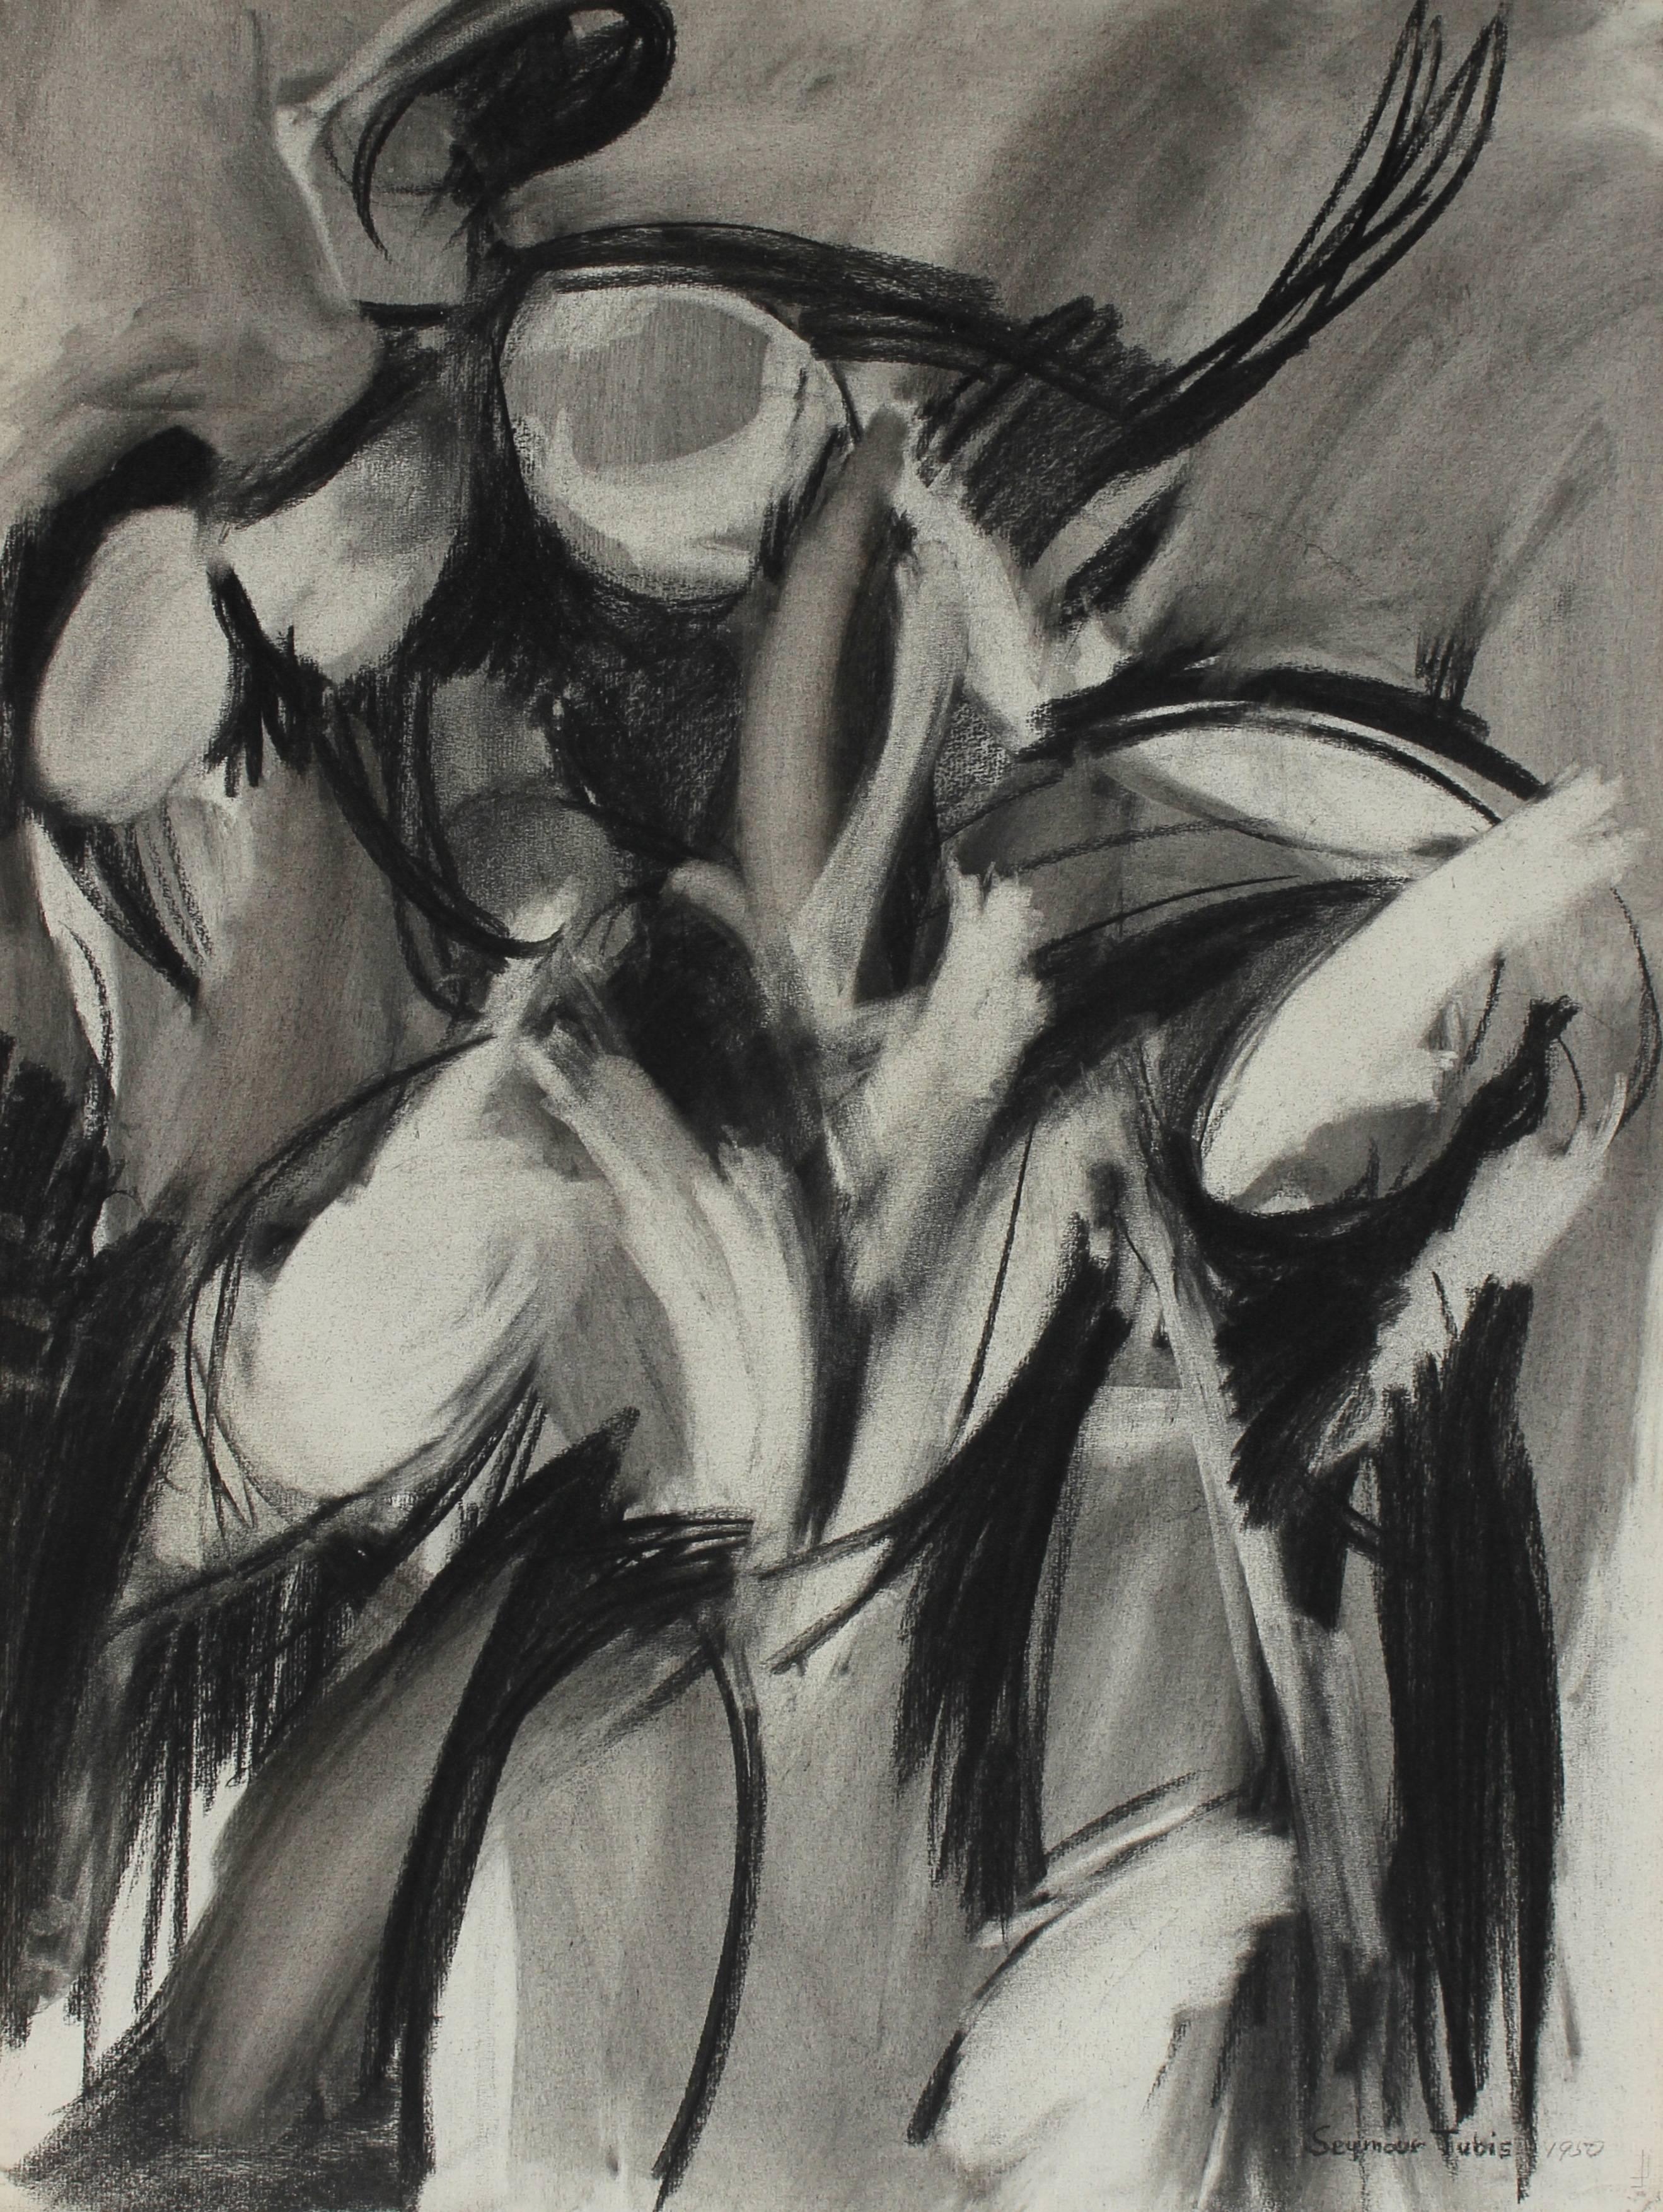 Seymour Tubis Abstract Drawing - Monochromatic Abstract Expressionist Study in Charcoal, 1950